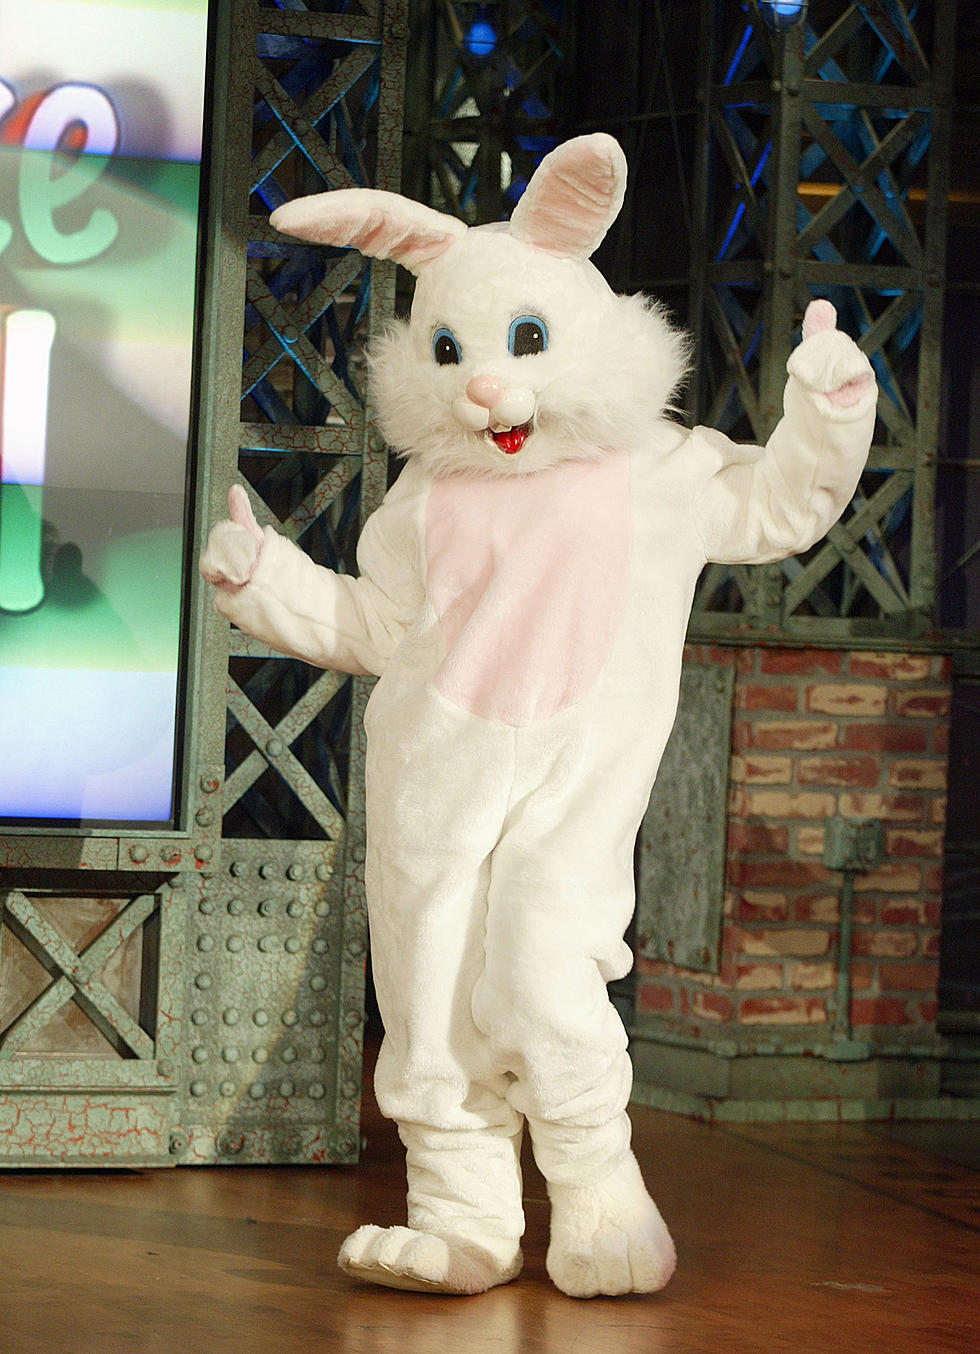 Hippity, Hoppity — The Easter Bunny’s on His Way! Here’s Where You Can Find Him in Buffalo